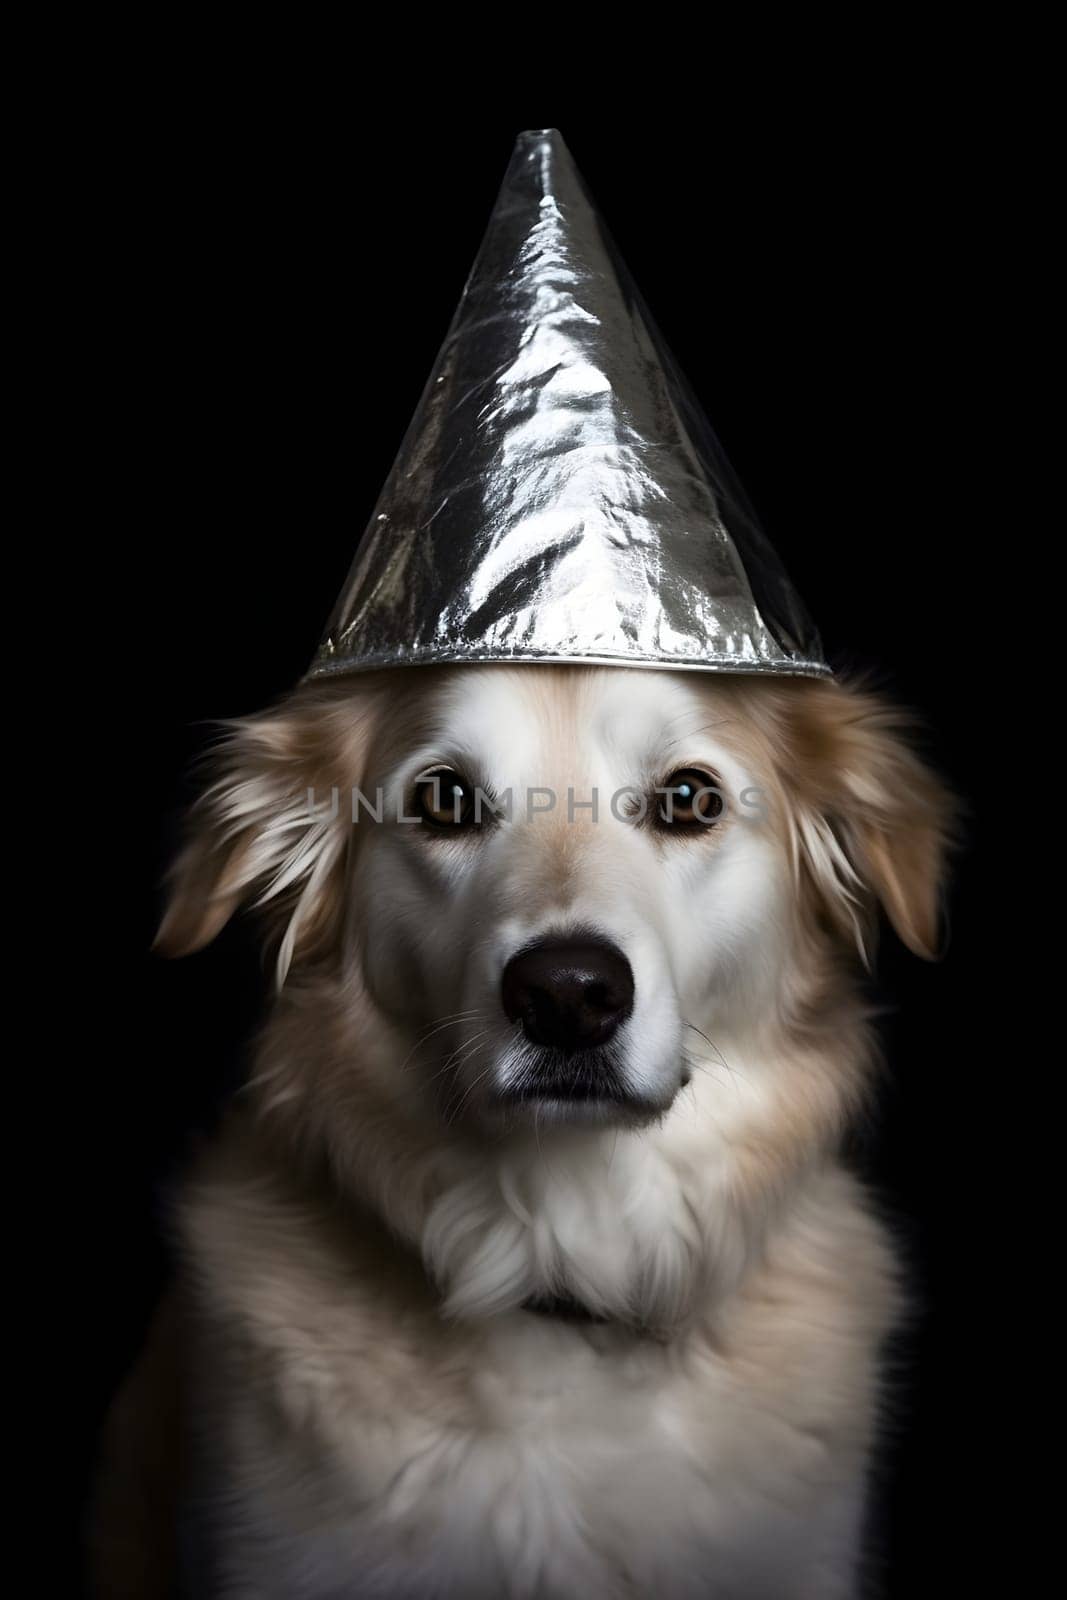 suspicious dog wearing foil hat on black background,. Neural network generated in May 2023. Not based on any actual scene or pattern.